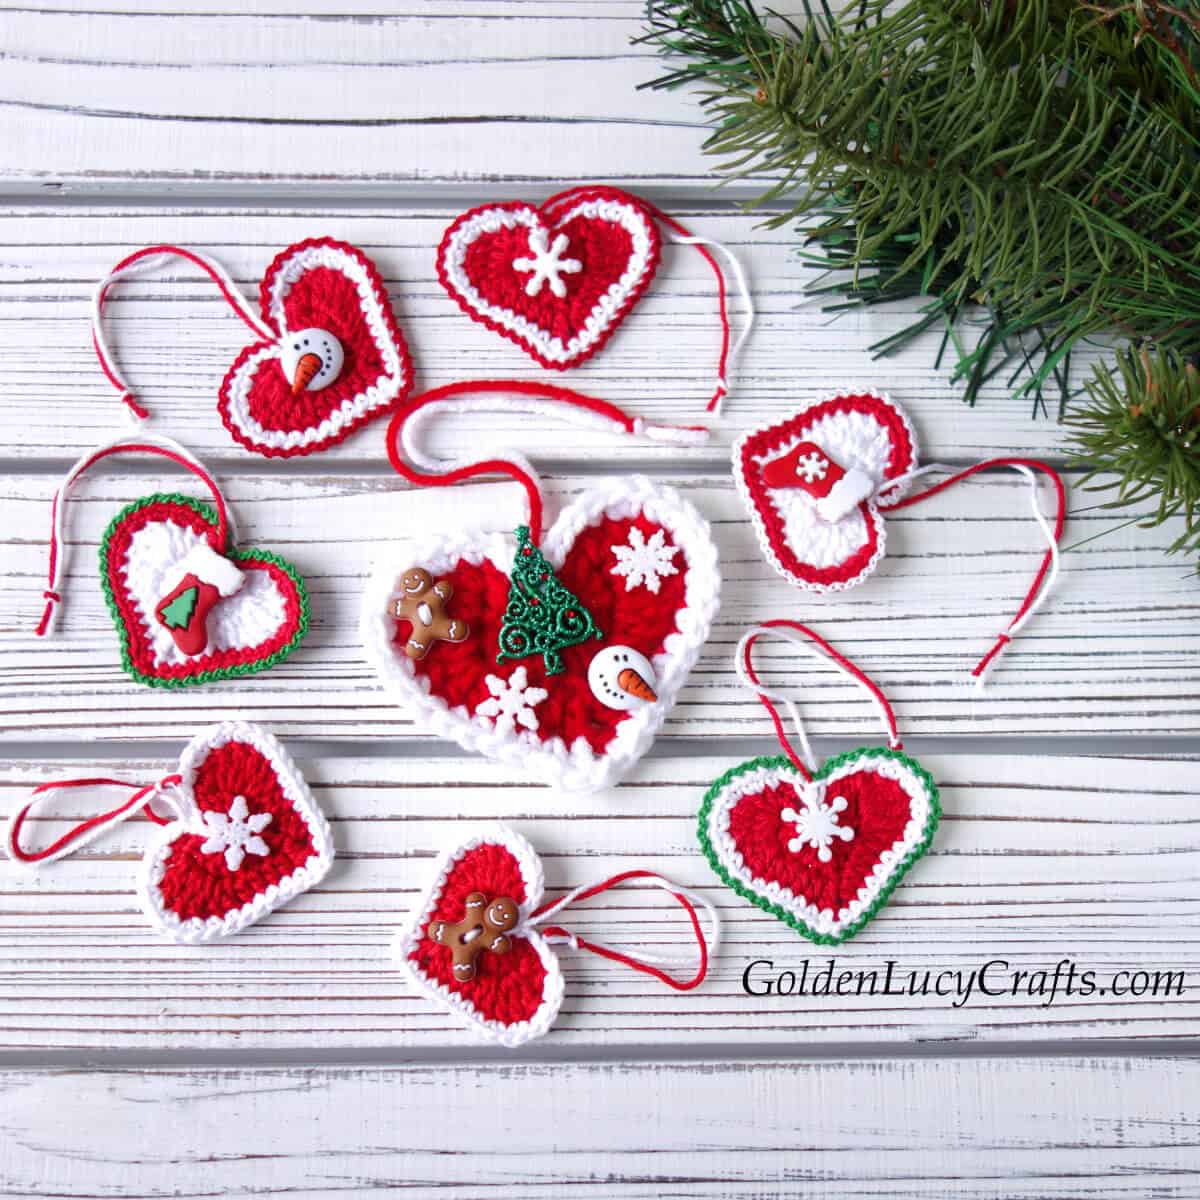 Crochet Christmas heart ornaments in red, white and green colors embellished with Christmas themed buttons.